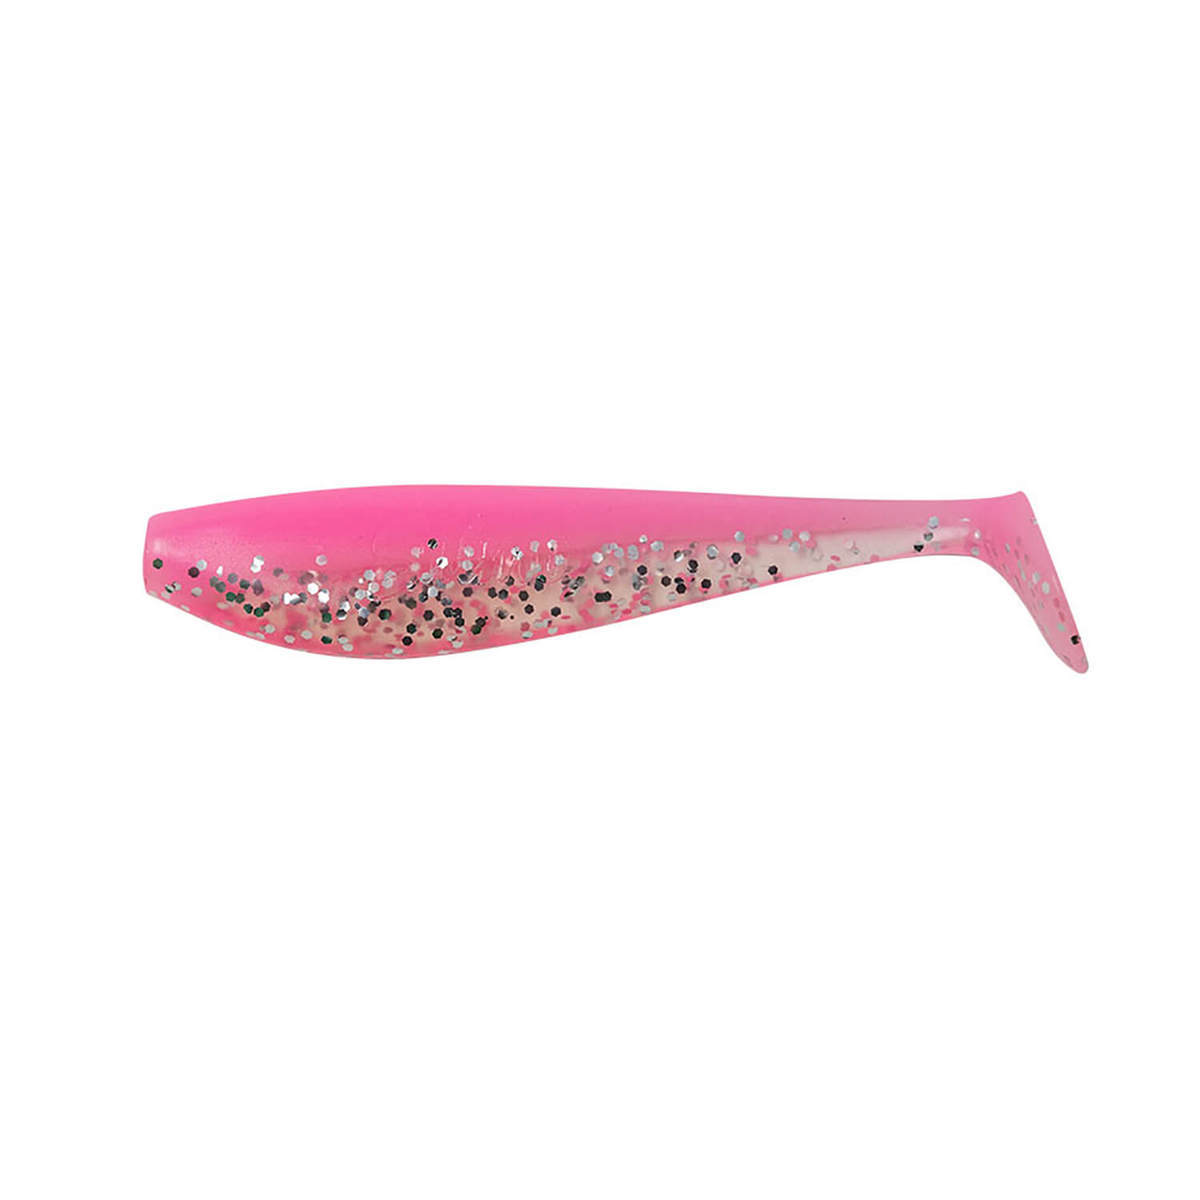 Salmo Walleye Shad Soft Swimbait - Pink Candy UV 3in | Sportsman's ...